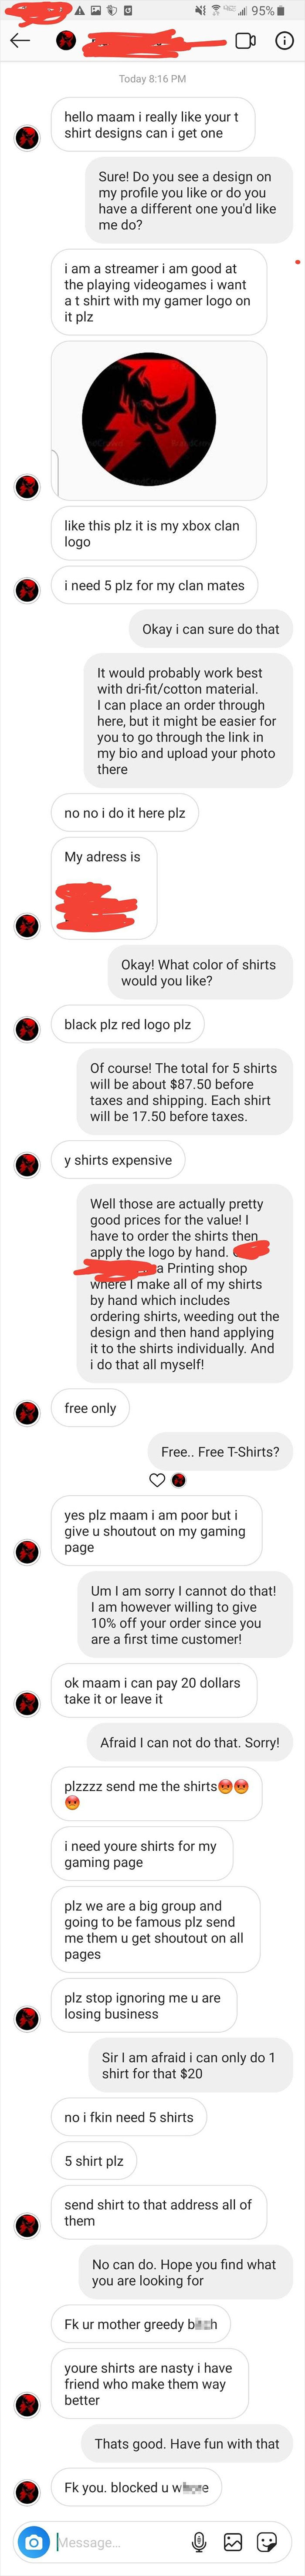 This Is My Friend Who Started A Small T Shirt Business A Few Months Aho